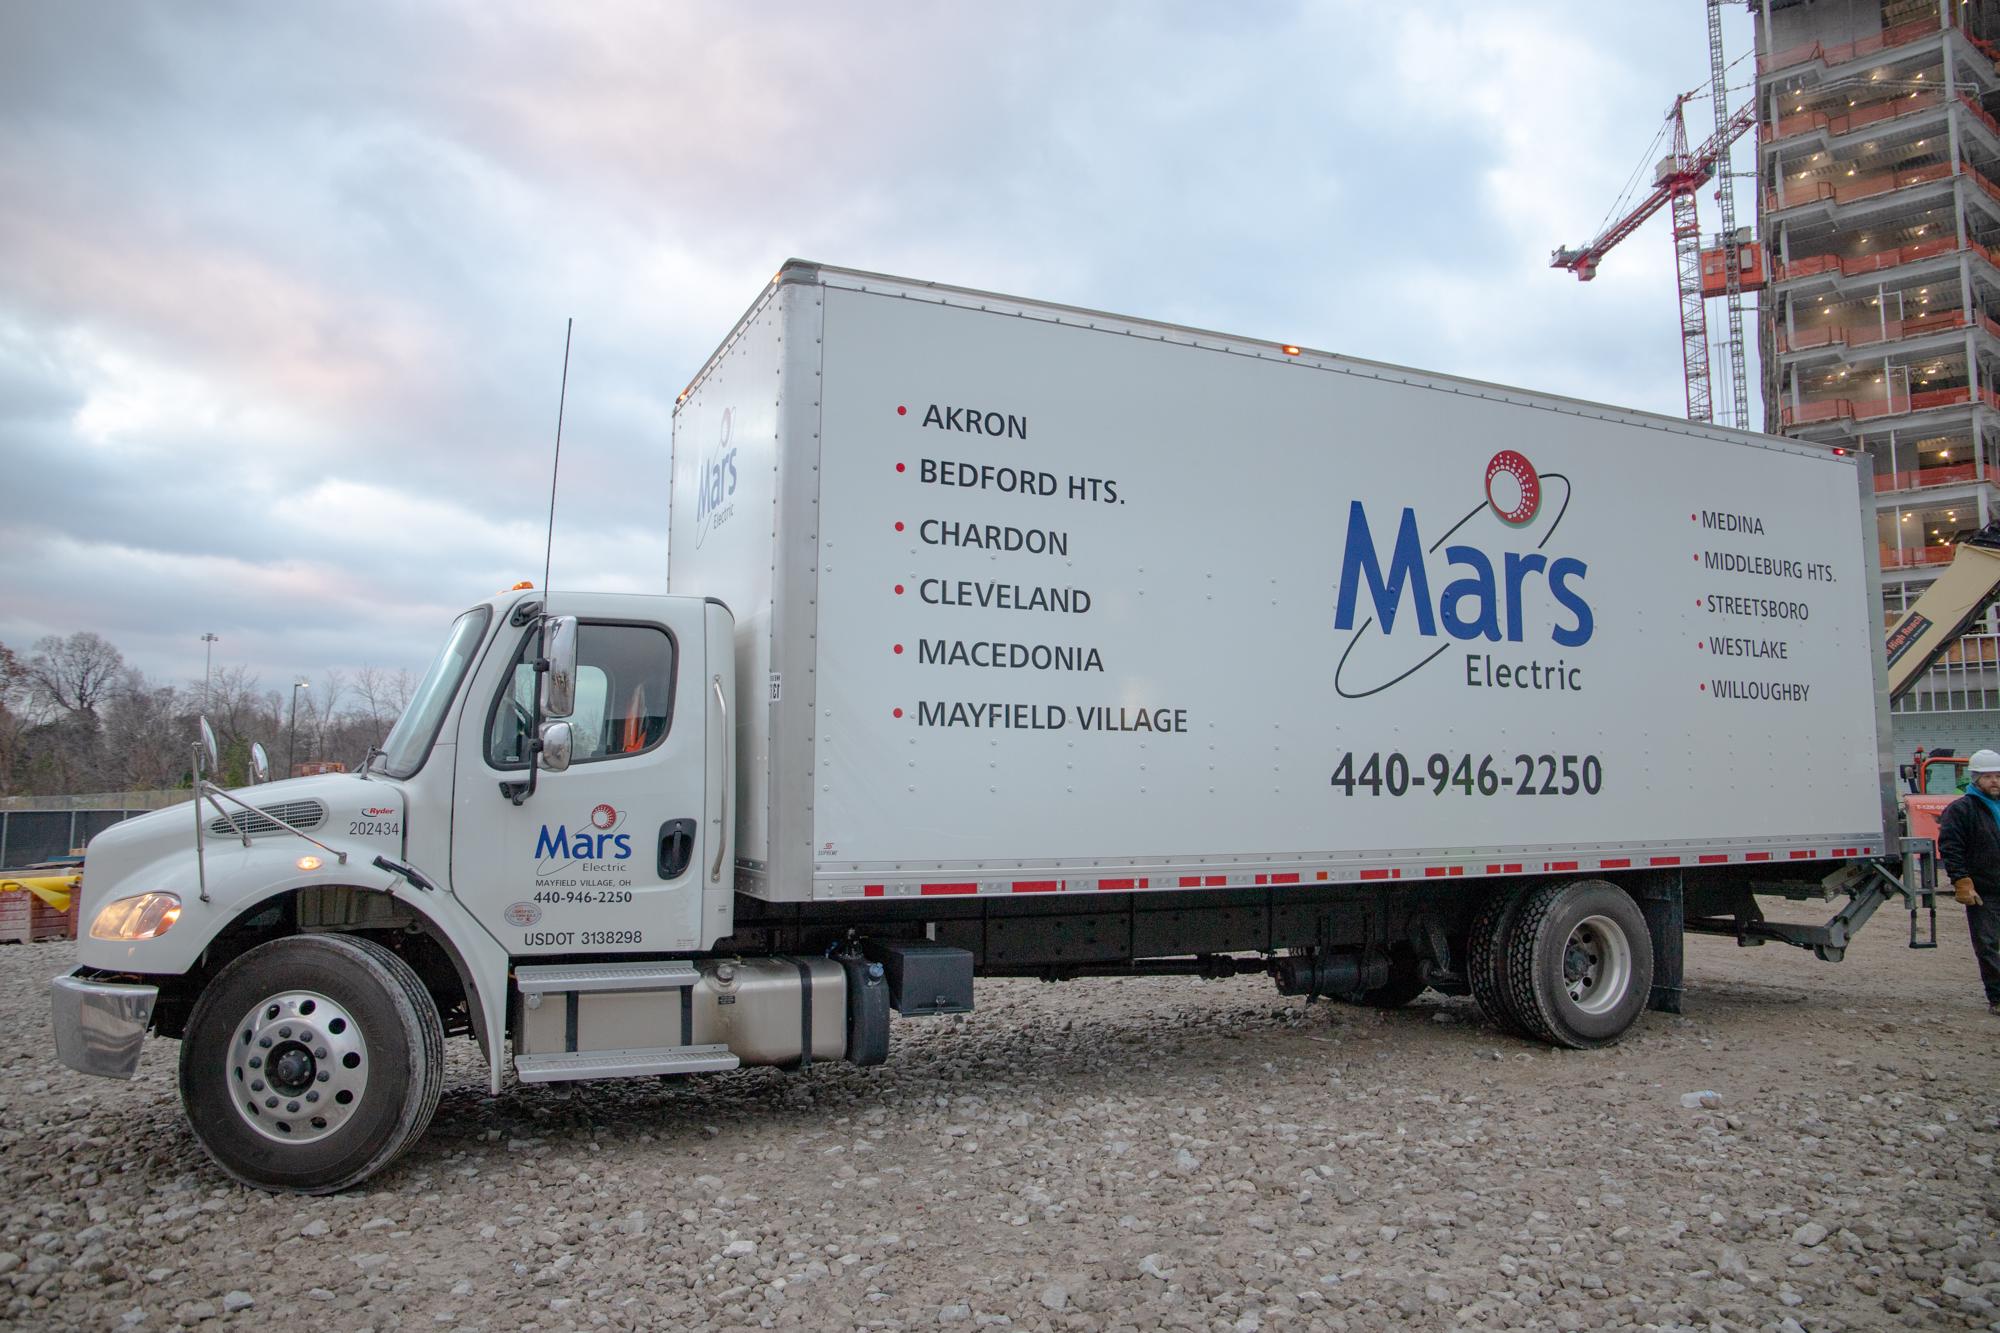 A Mars Electric delivery truck parked at a skyscraper being built